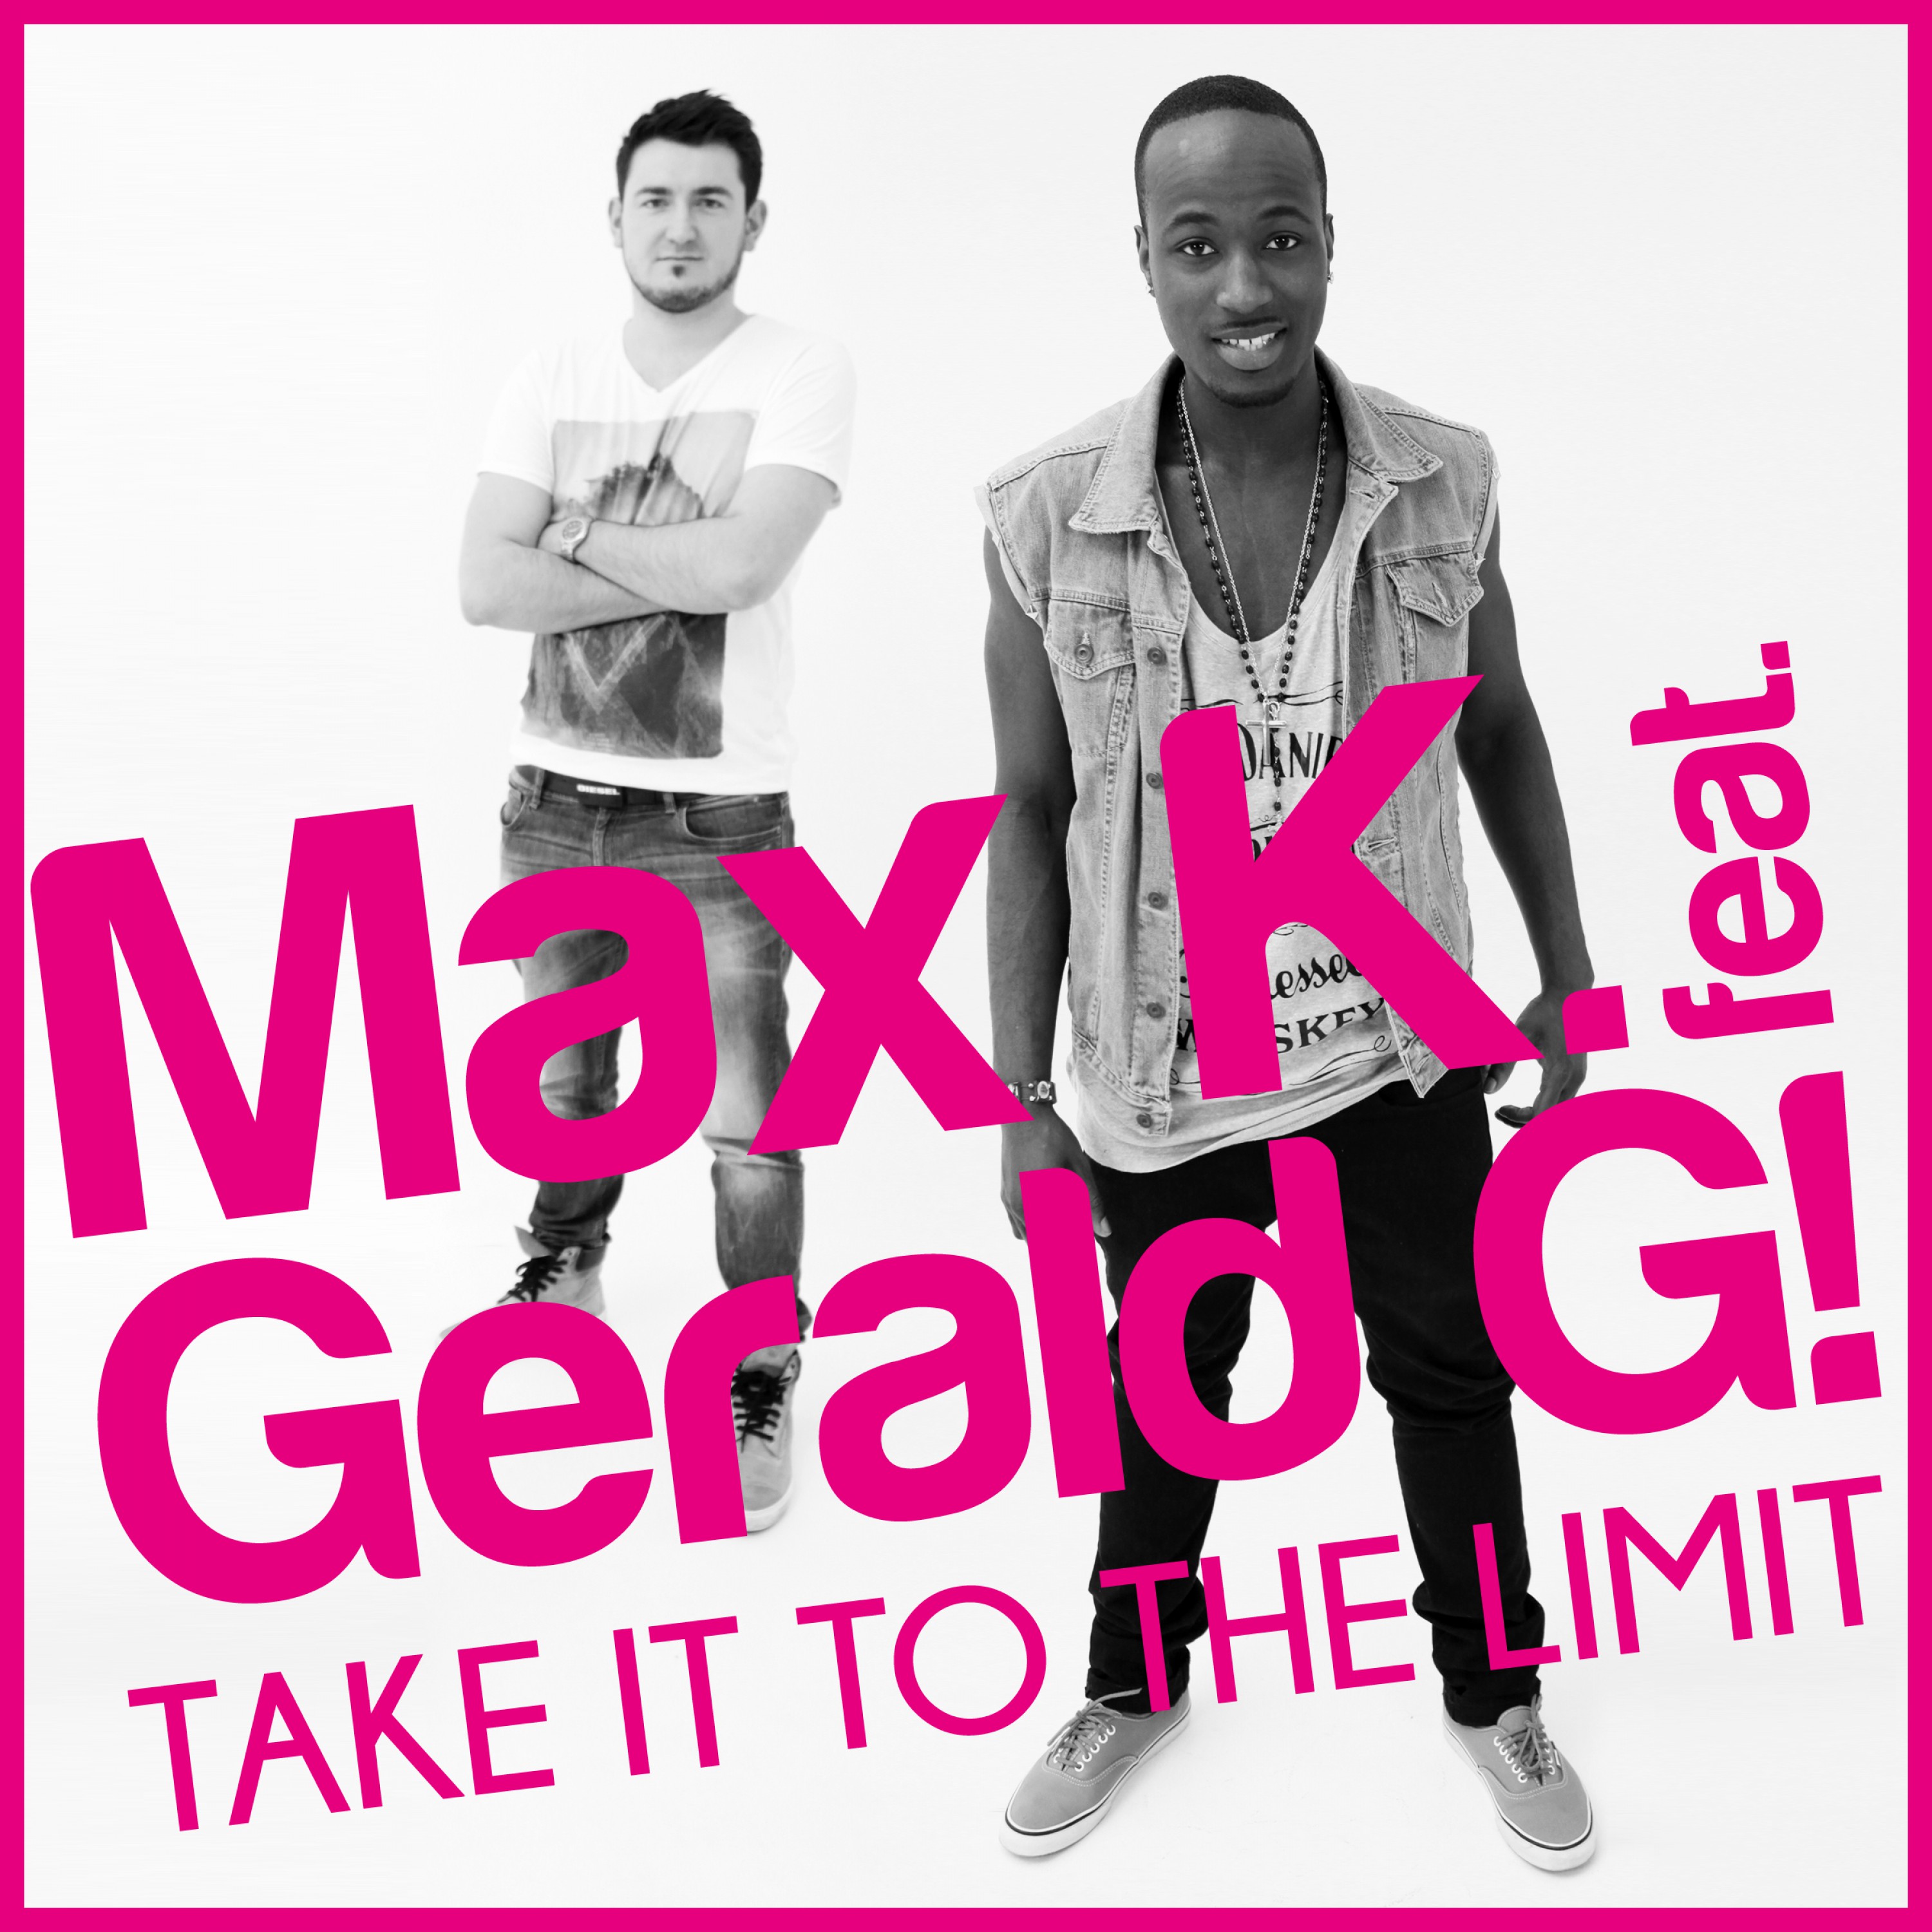 Take It to the Limit (Die Hoerer Remix)